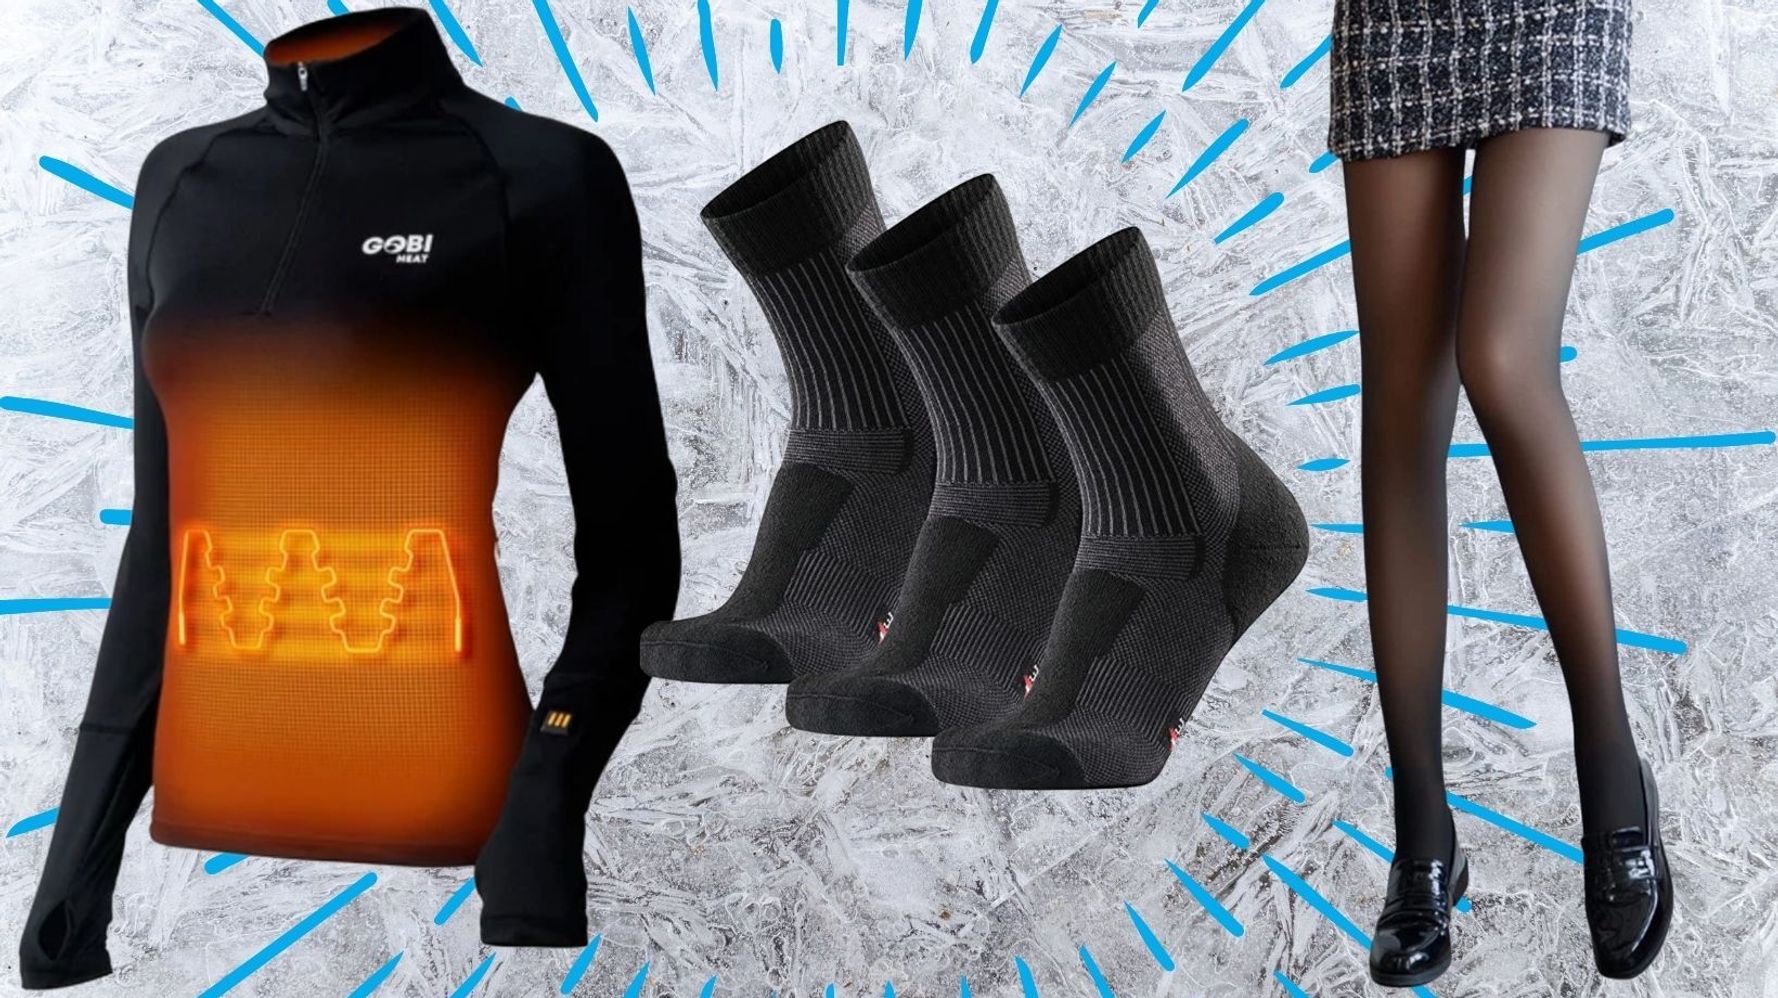 How to choose the best thermal wear to keep yourself warm?